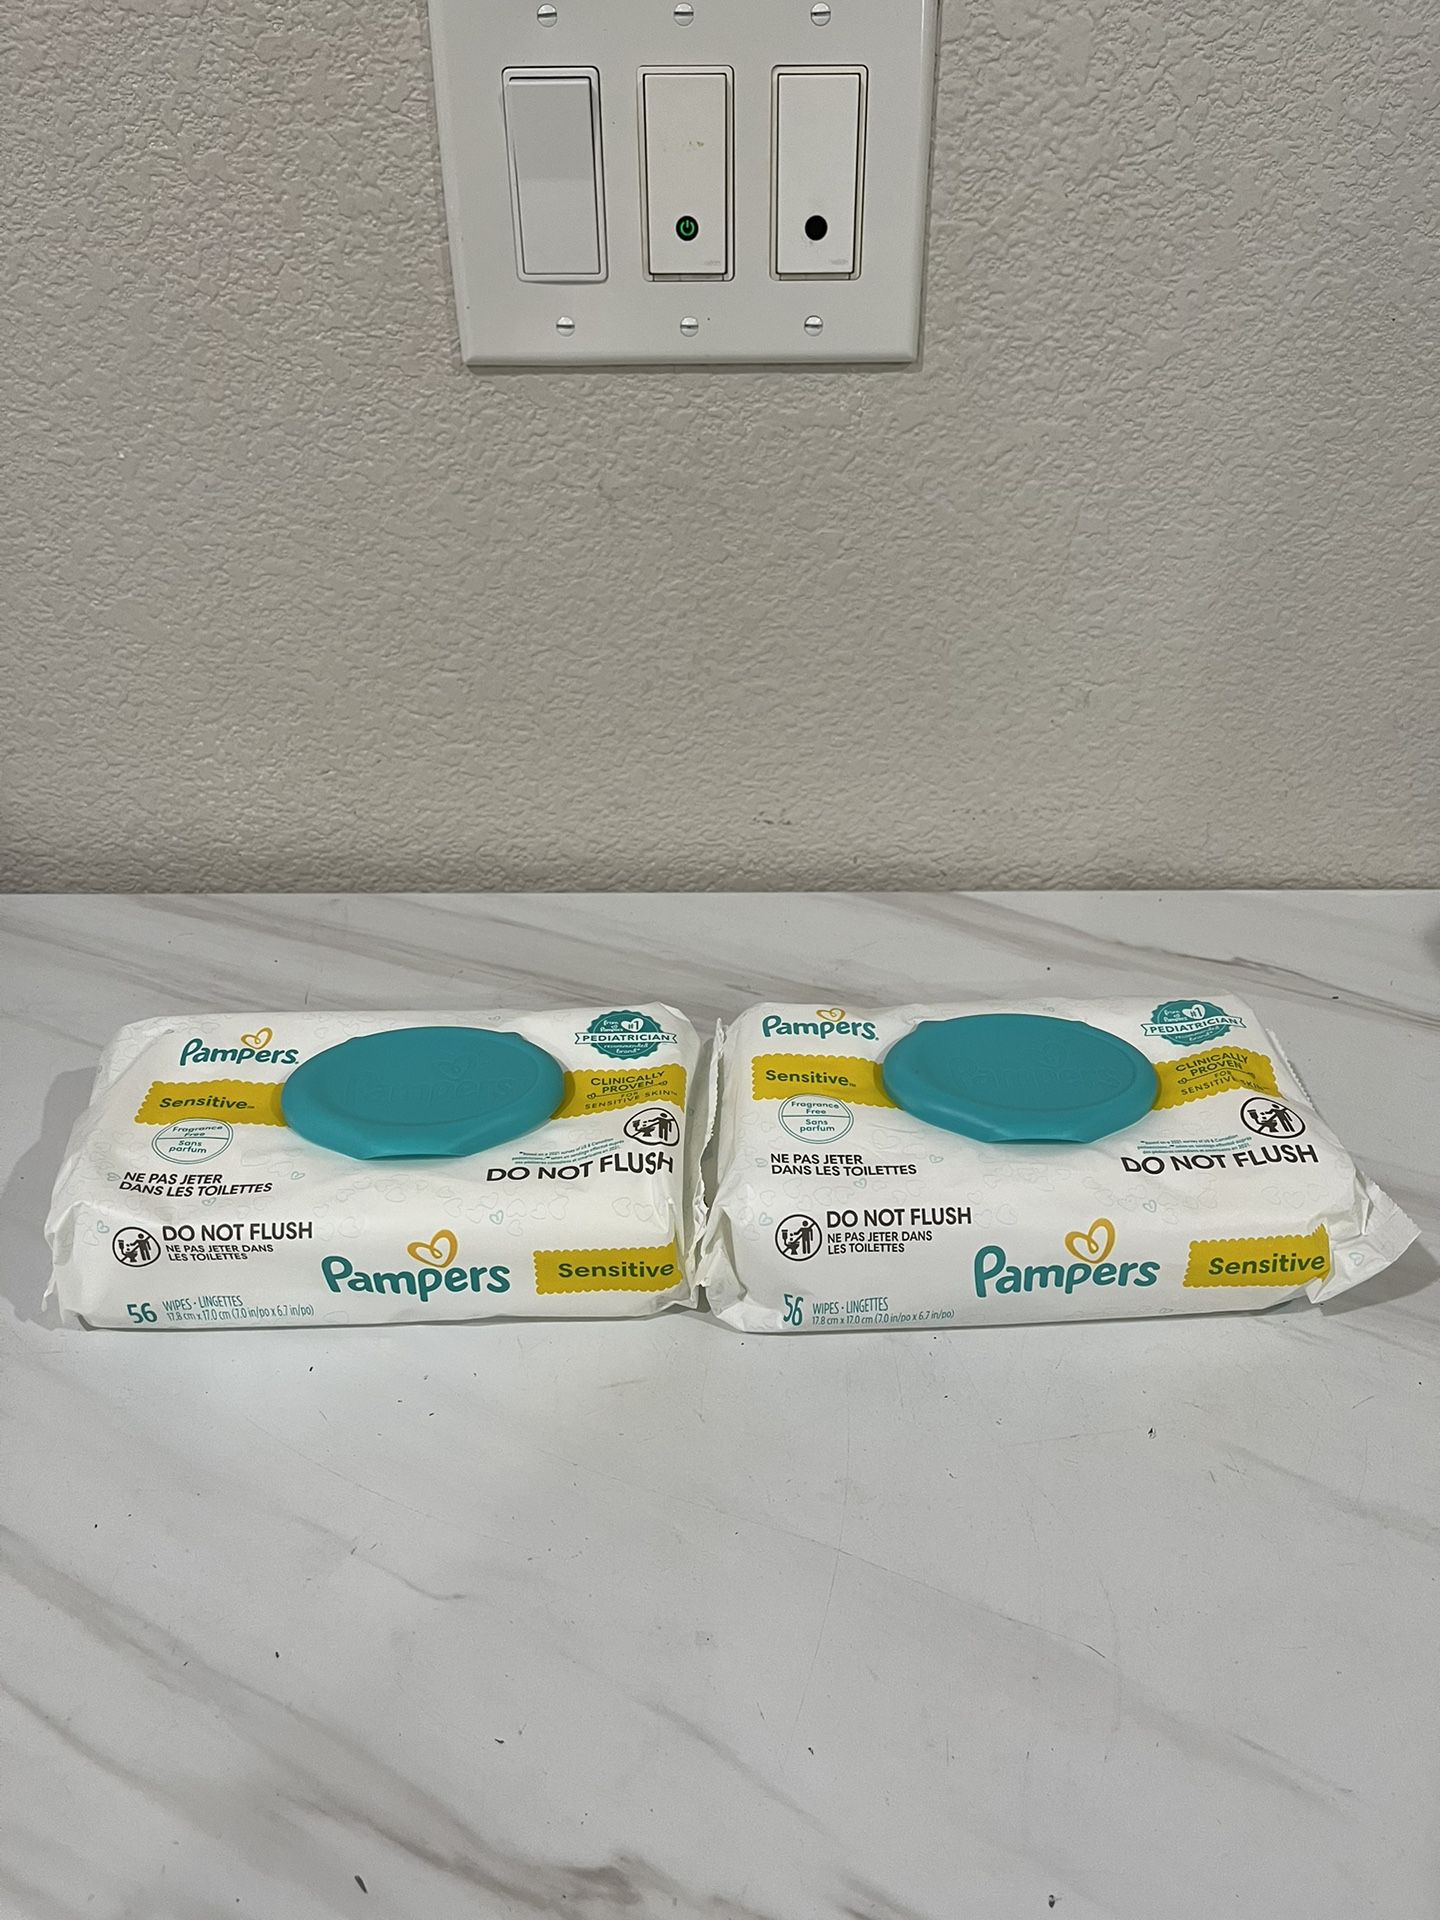 Brand new Pampers Baby Unscented Wipes, Sensitive, 56 Count Each (2 For $3)